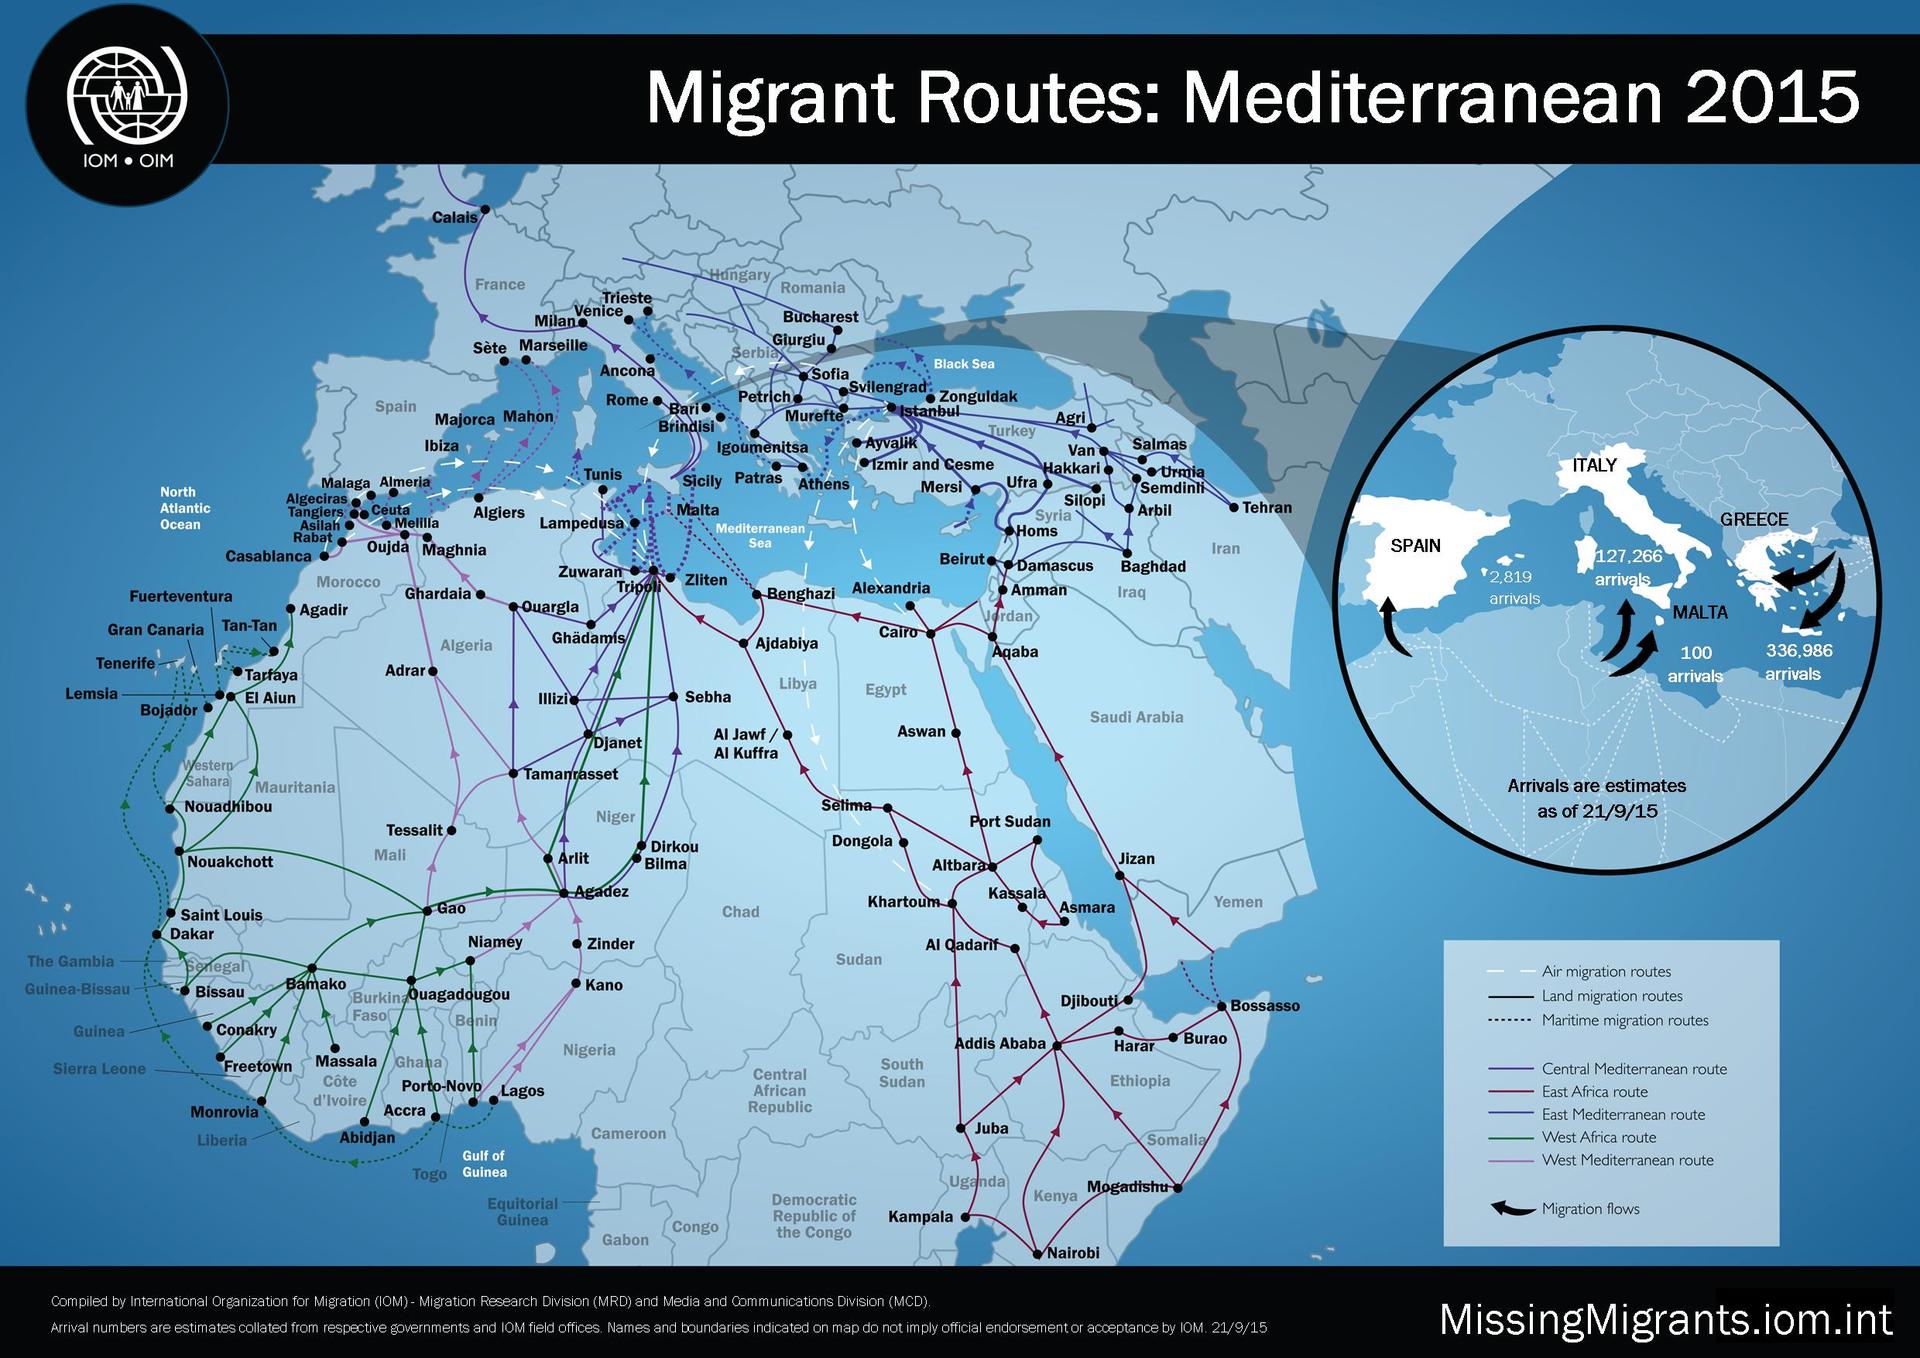 Migrant routes in the Mediterranean in 2015